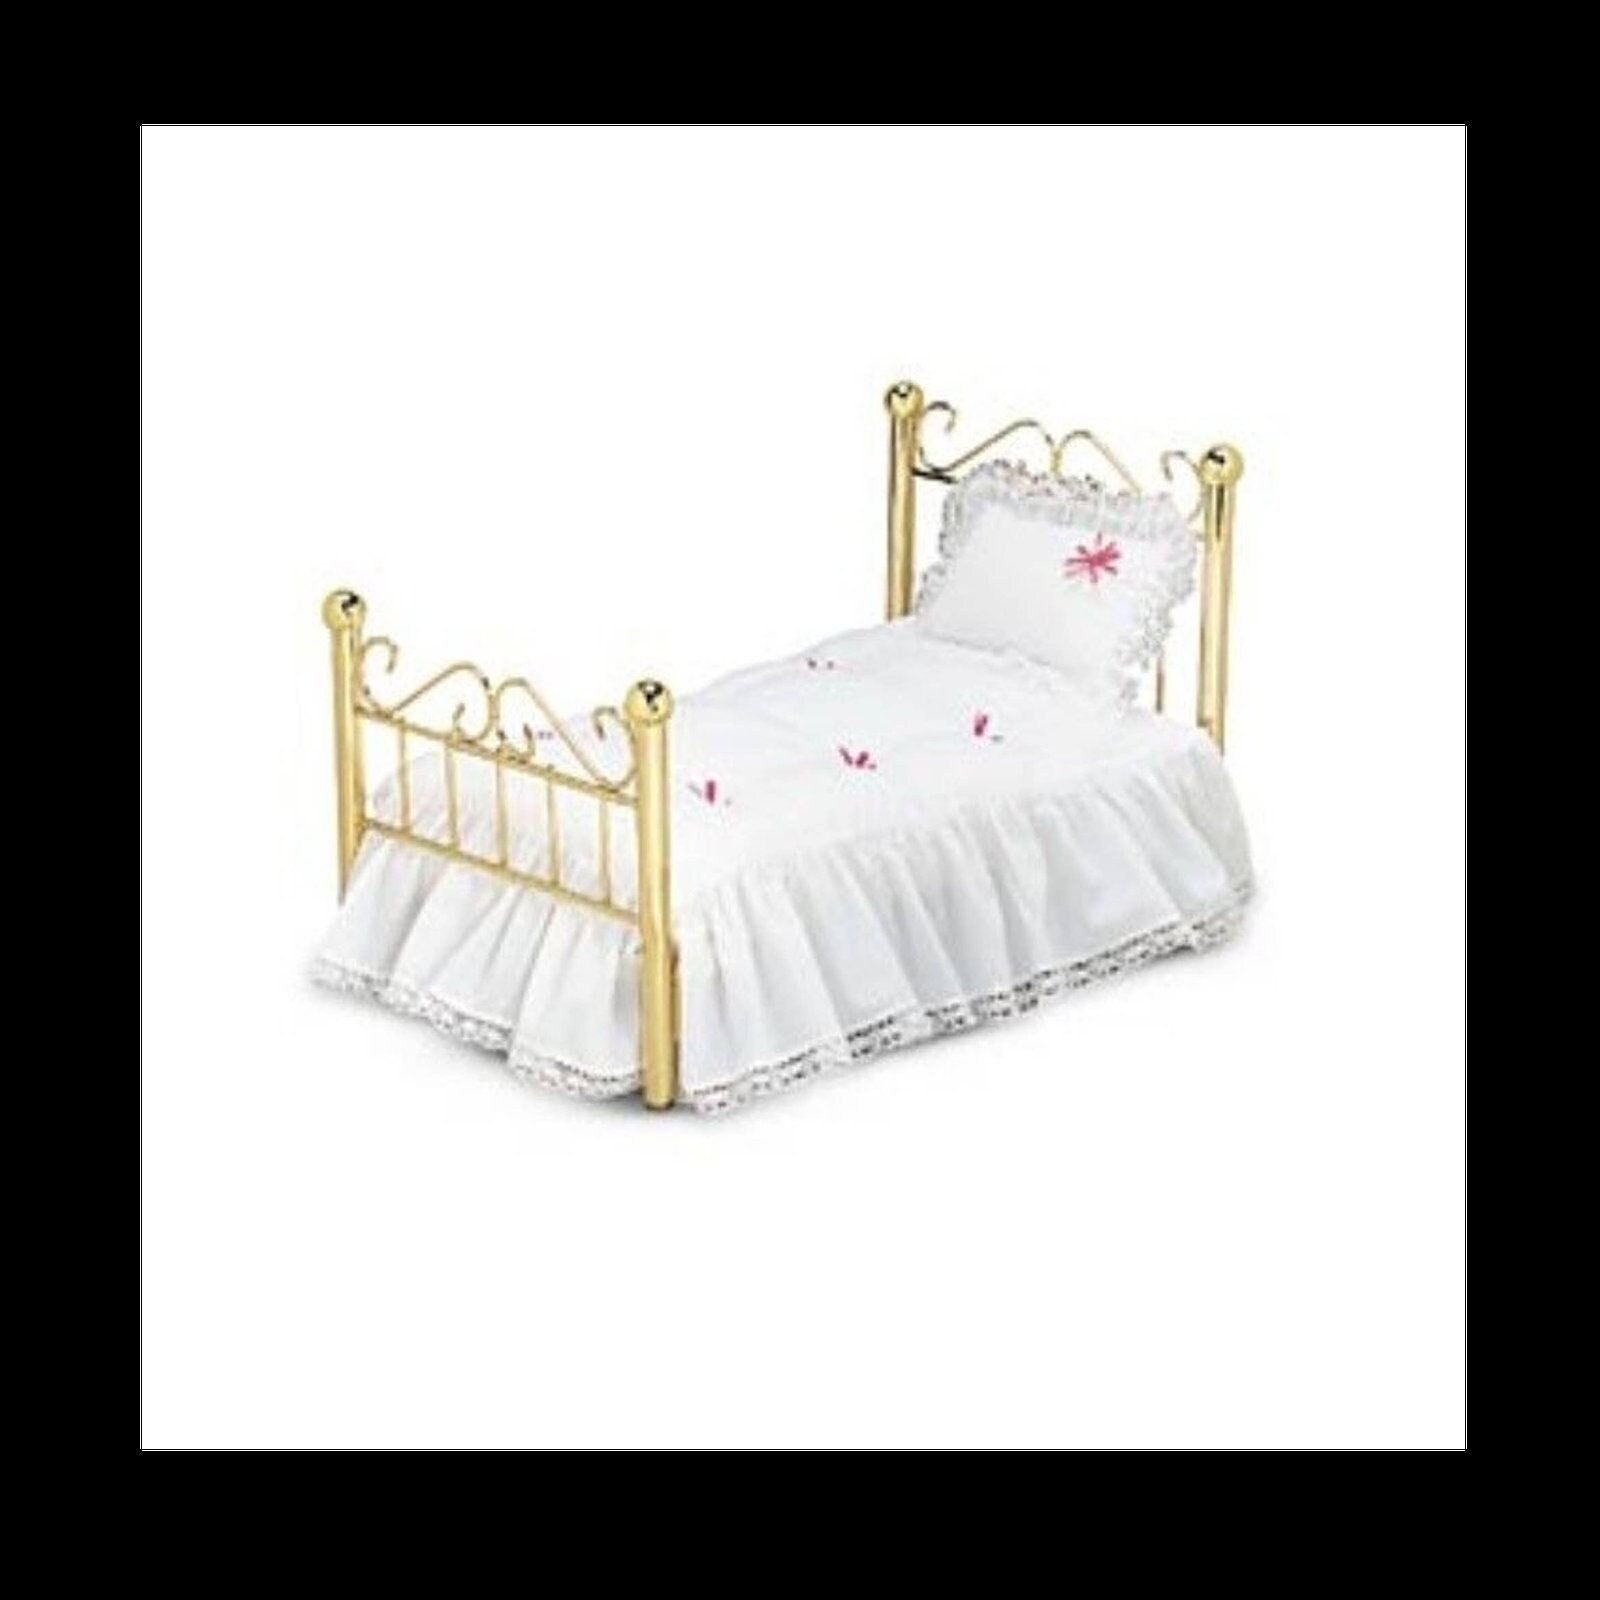 Pleasant Company 18 American Girl Doll Samantha's Brass Bed